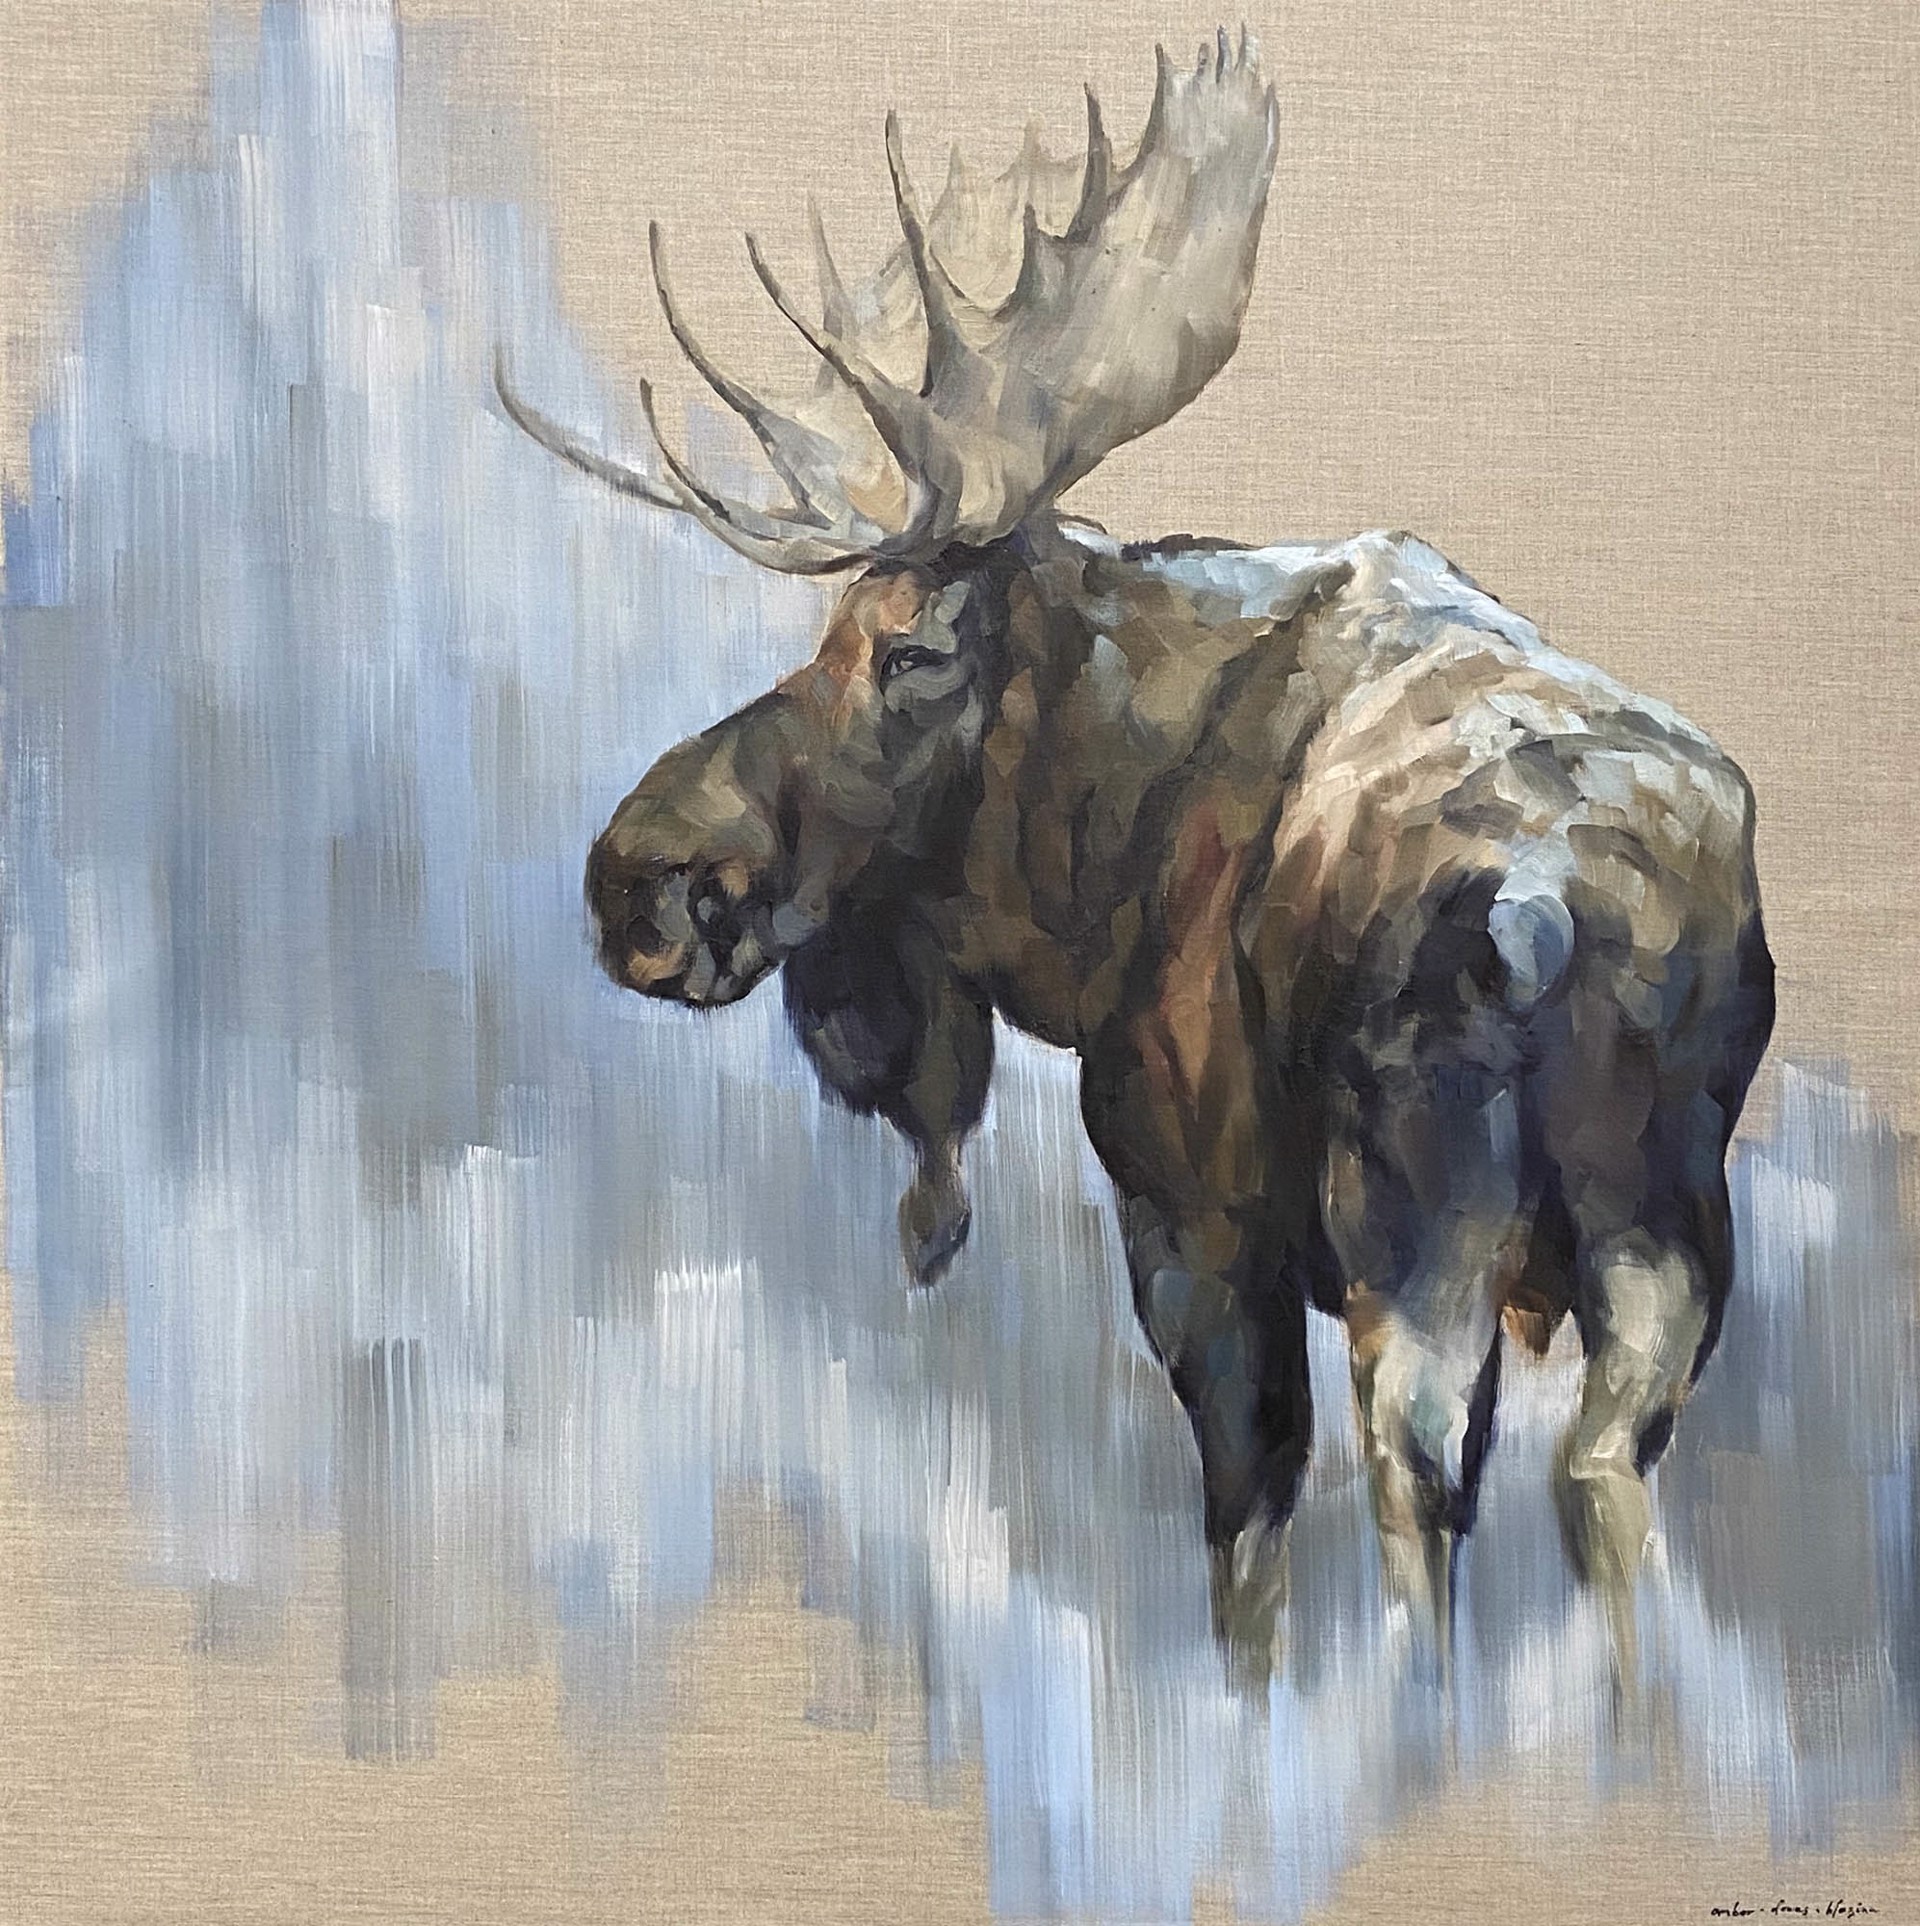 Amber Blazina Bull Moose Portrait In Oil On Linen, A Contemporary Fine Art Painting and Modern Wildlife Art Piece Available At Gallery Wild